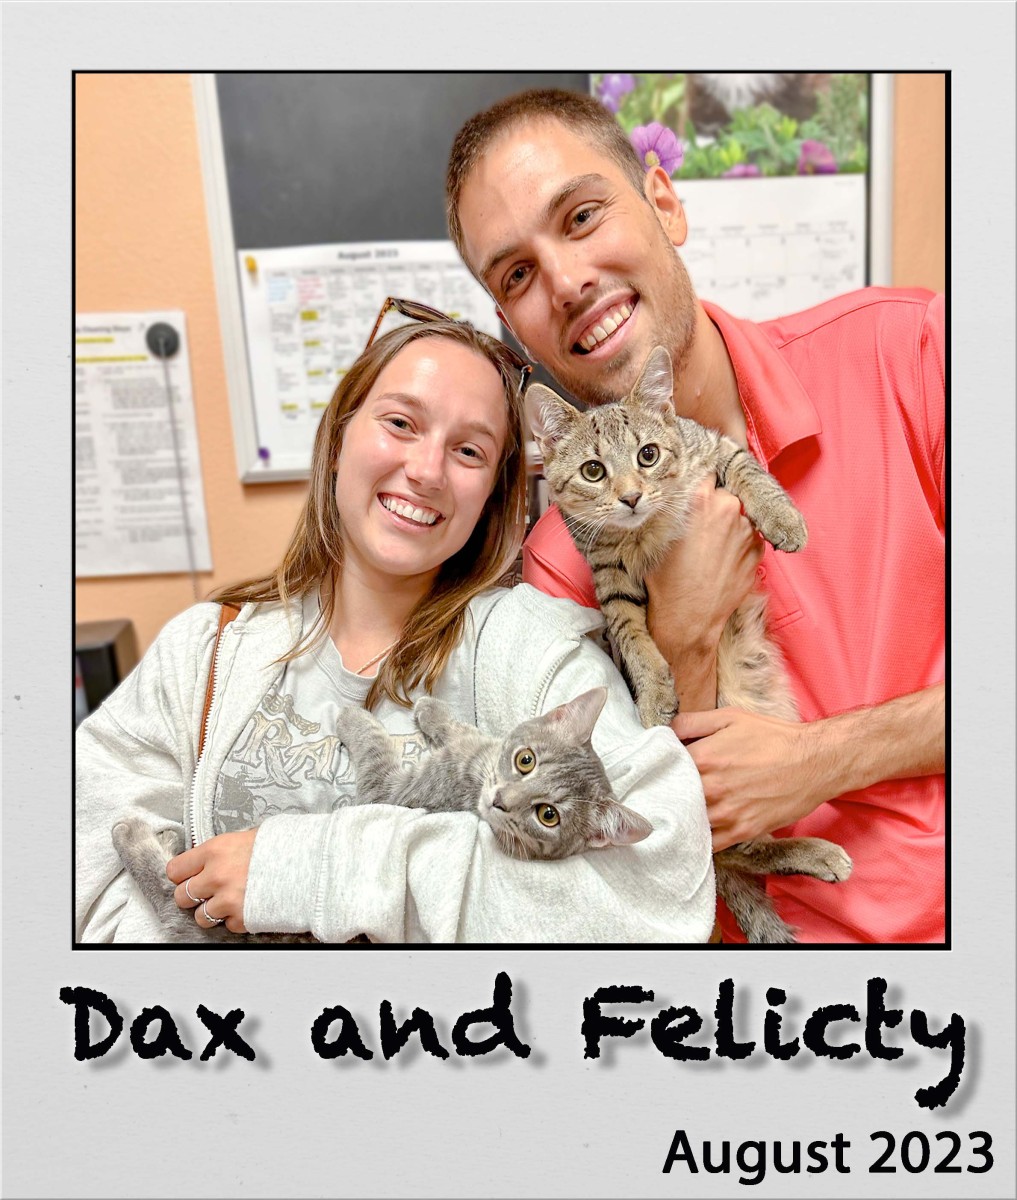 Adopt-Dax-and-Felicty-Aug2023